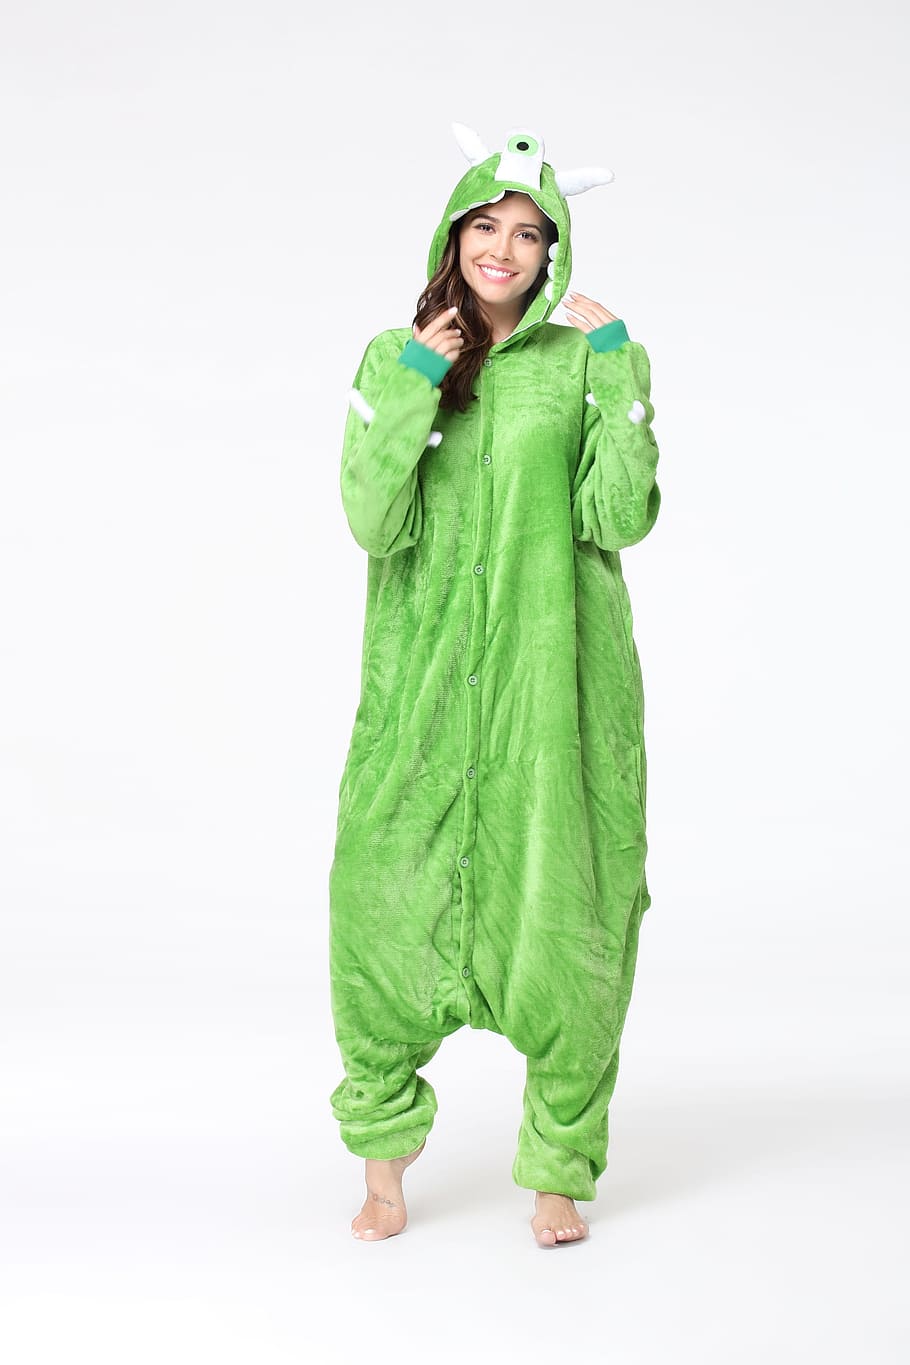 onesies, cartoon pajamas, animal costumes, green color, studio shot, one person, full length, looking at camera, portrait, clothing